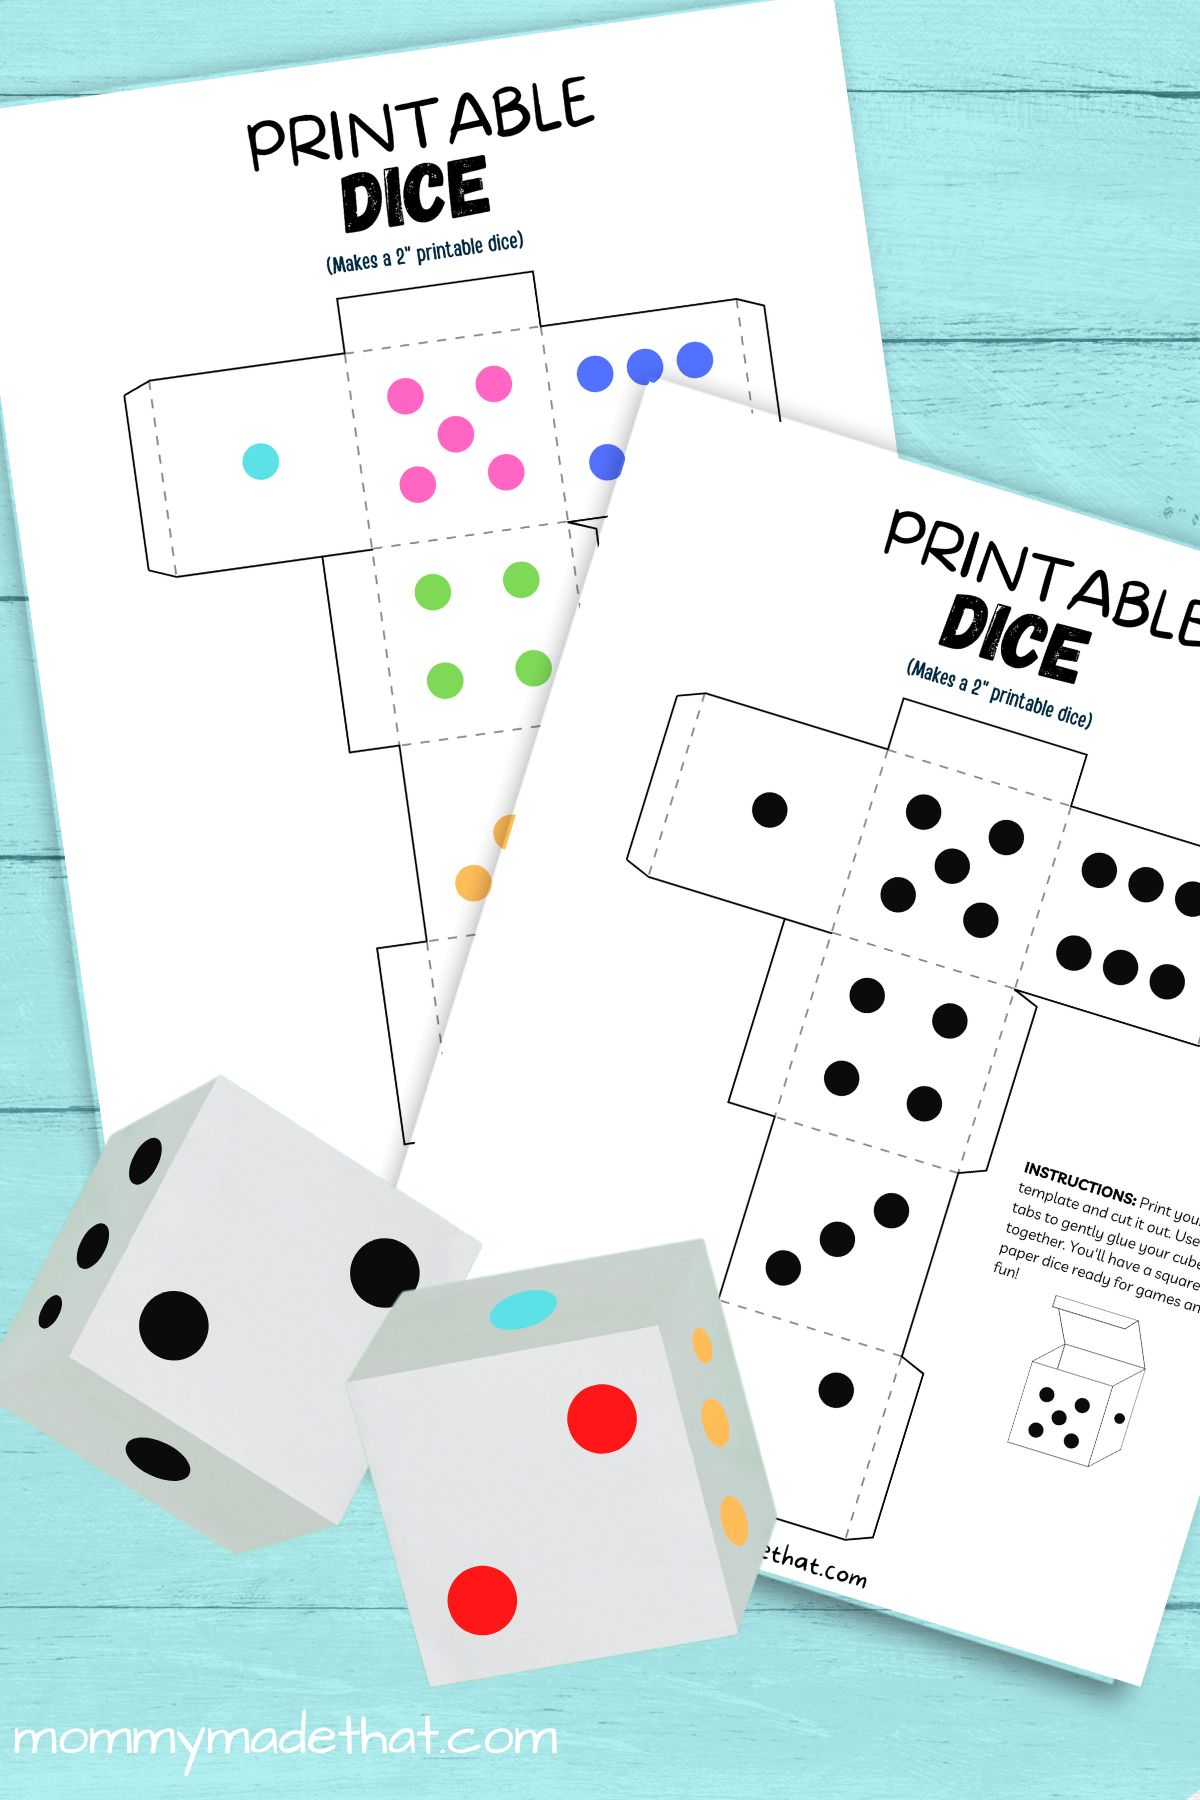 Printable Dice Template (How to Make Paper Dice)